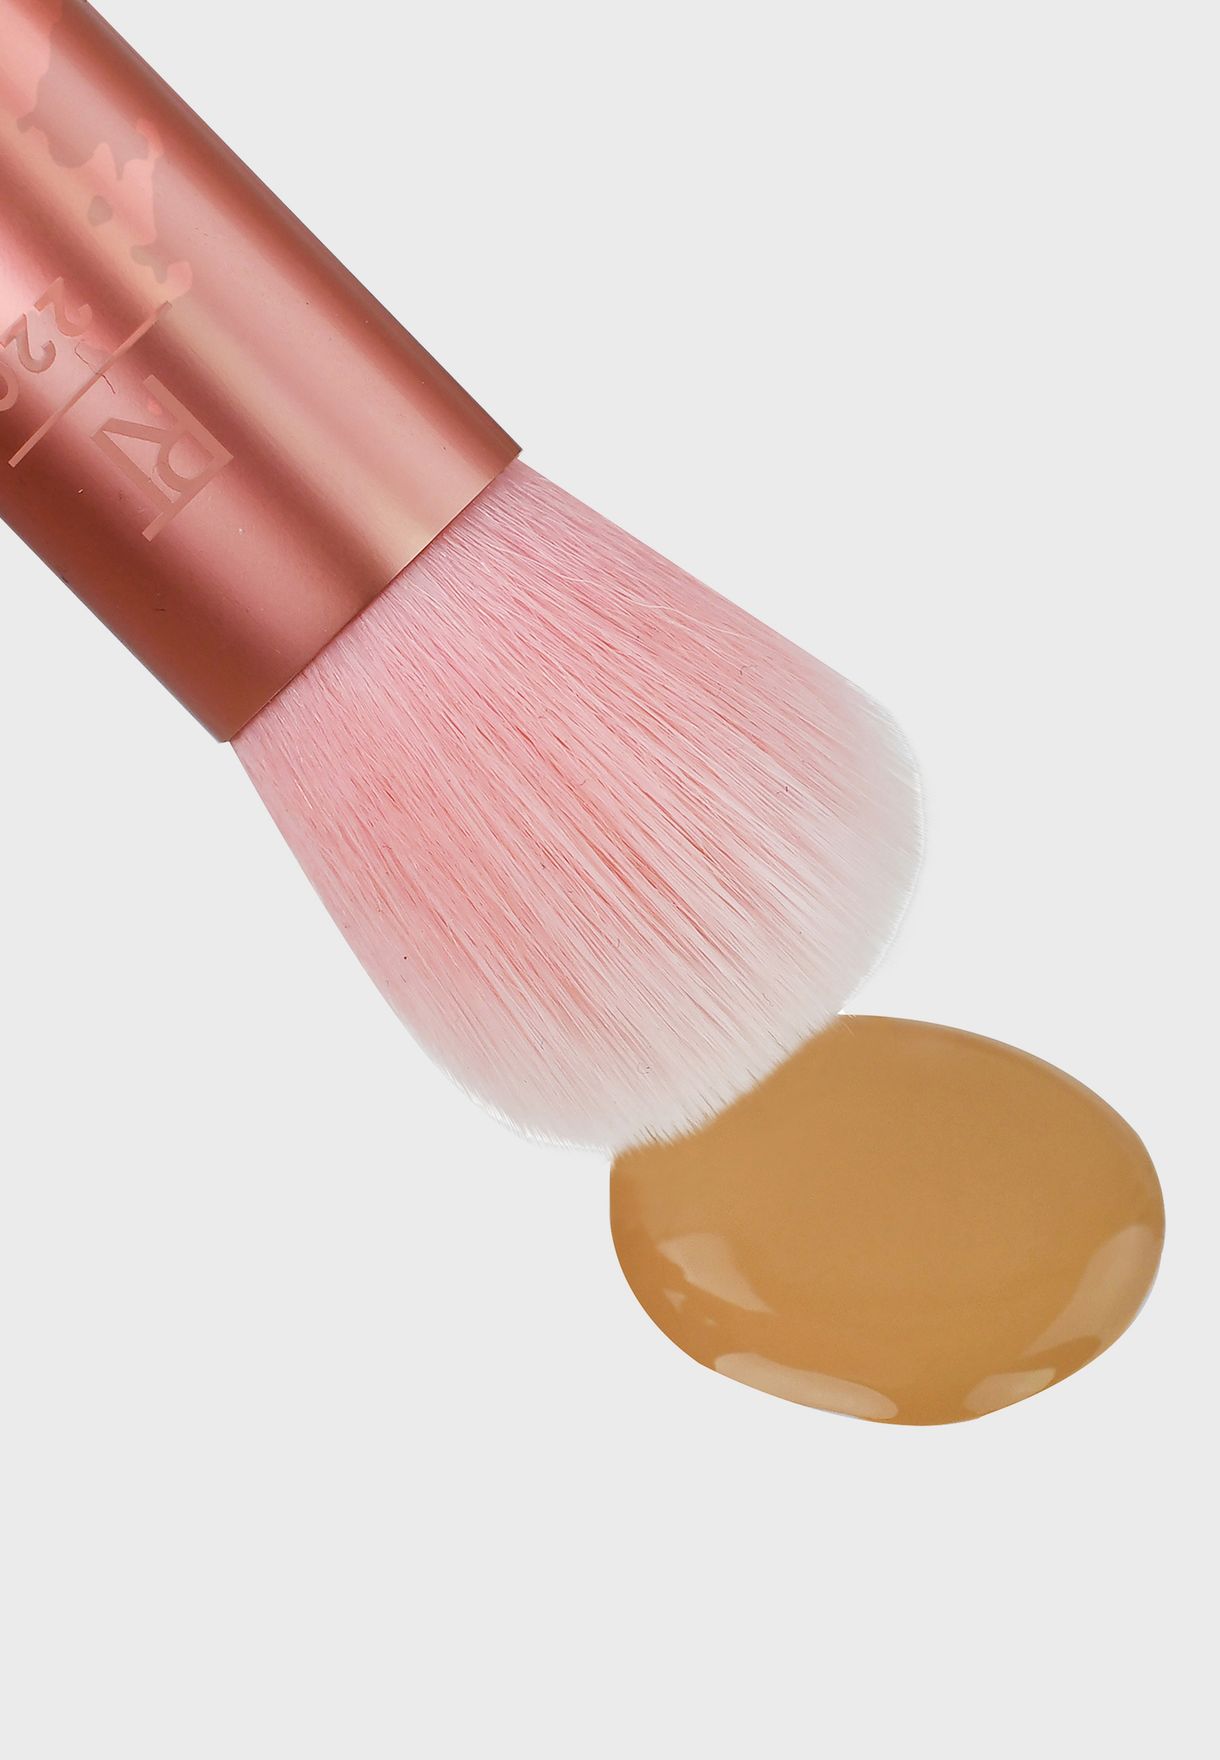 Light Layer Complexion Brush - RT 220